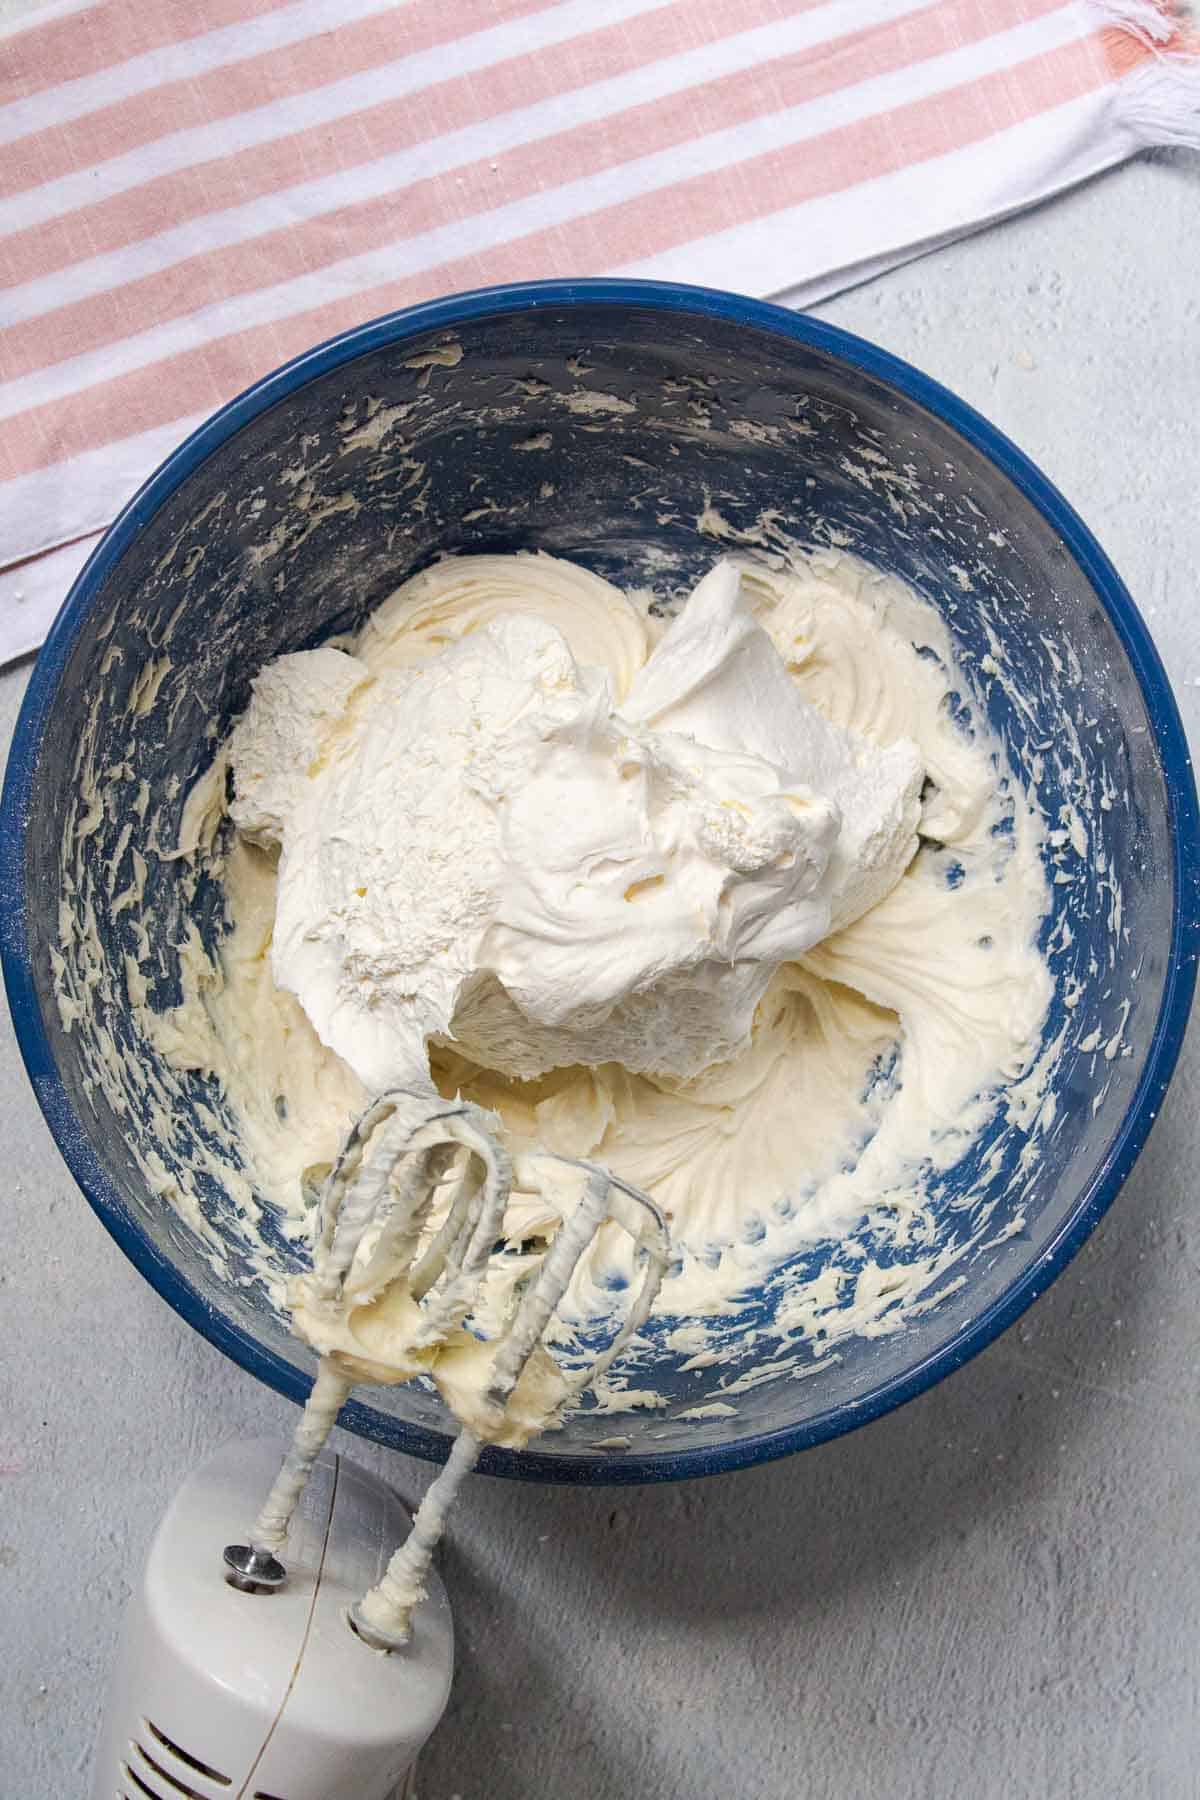 Thawed Cool Whip is added to the mixing bowl